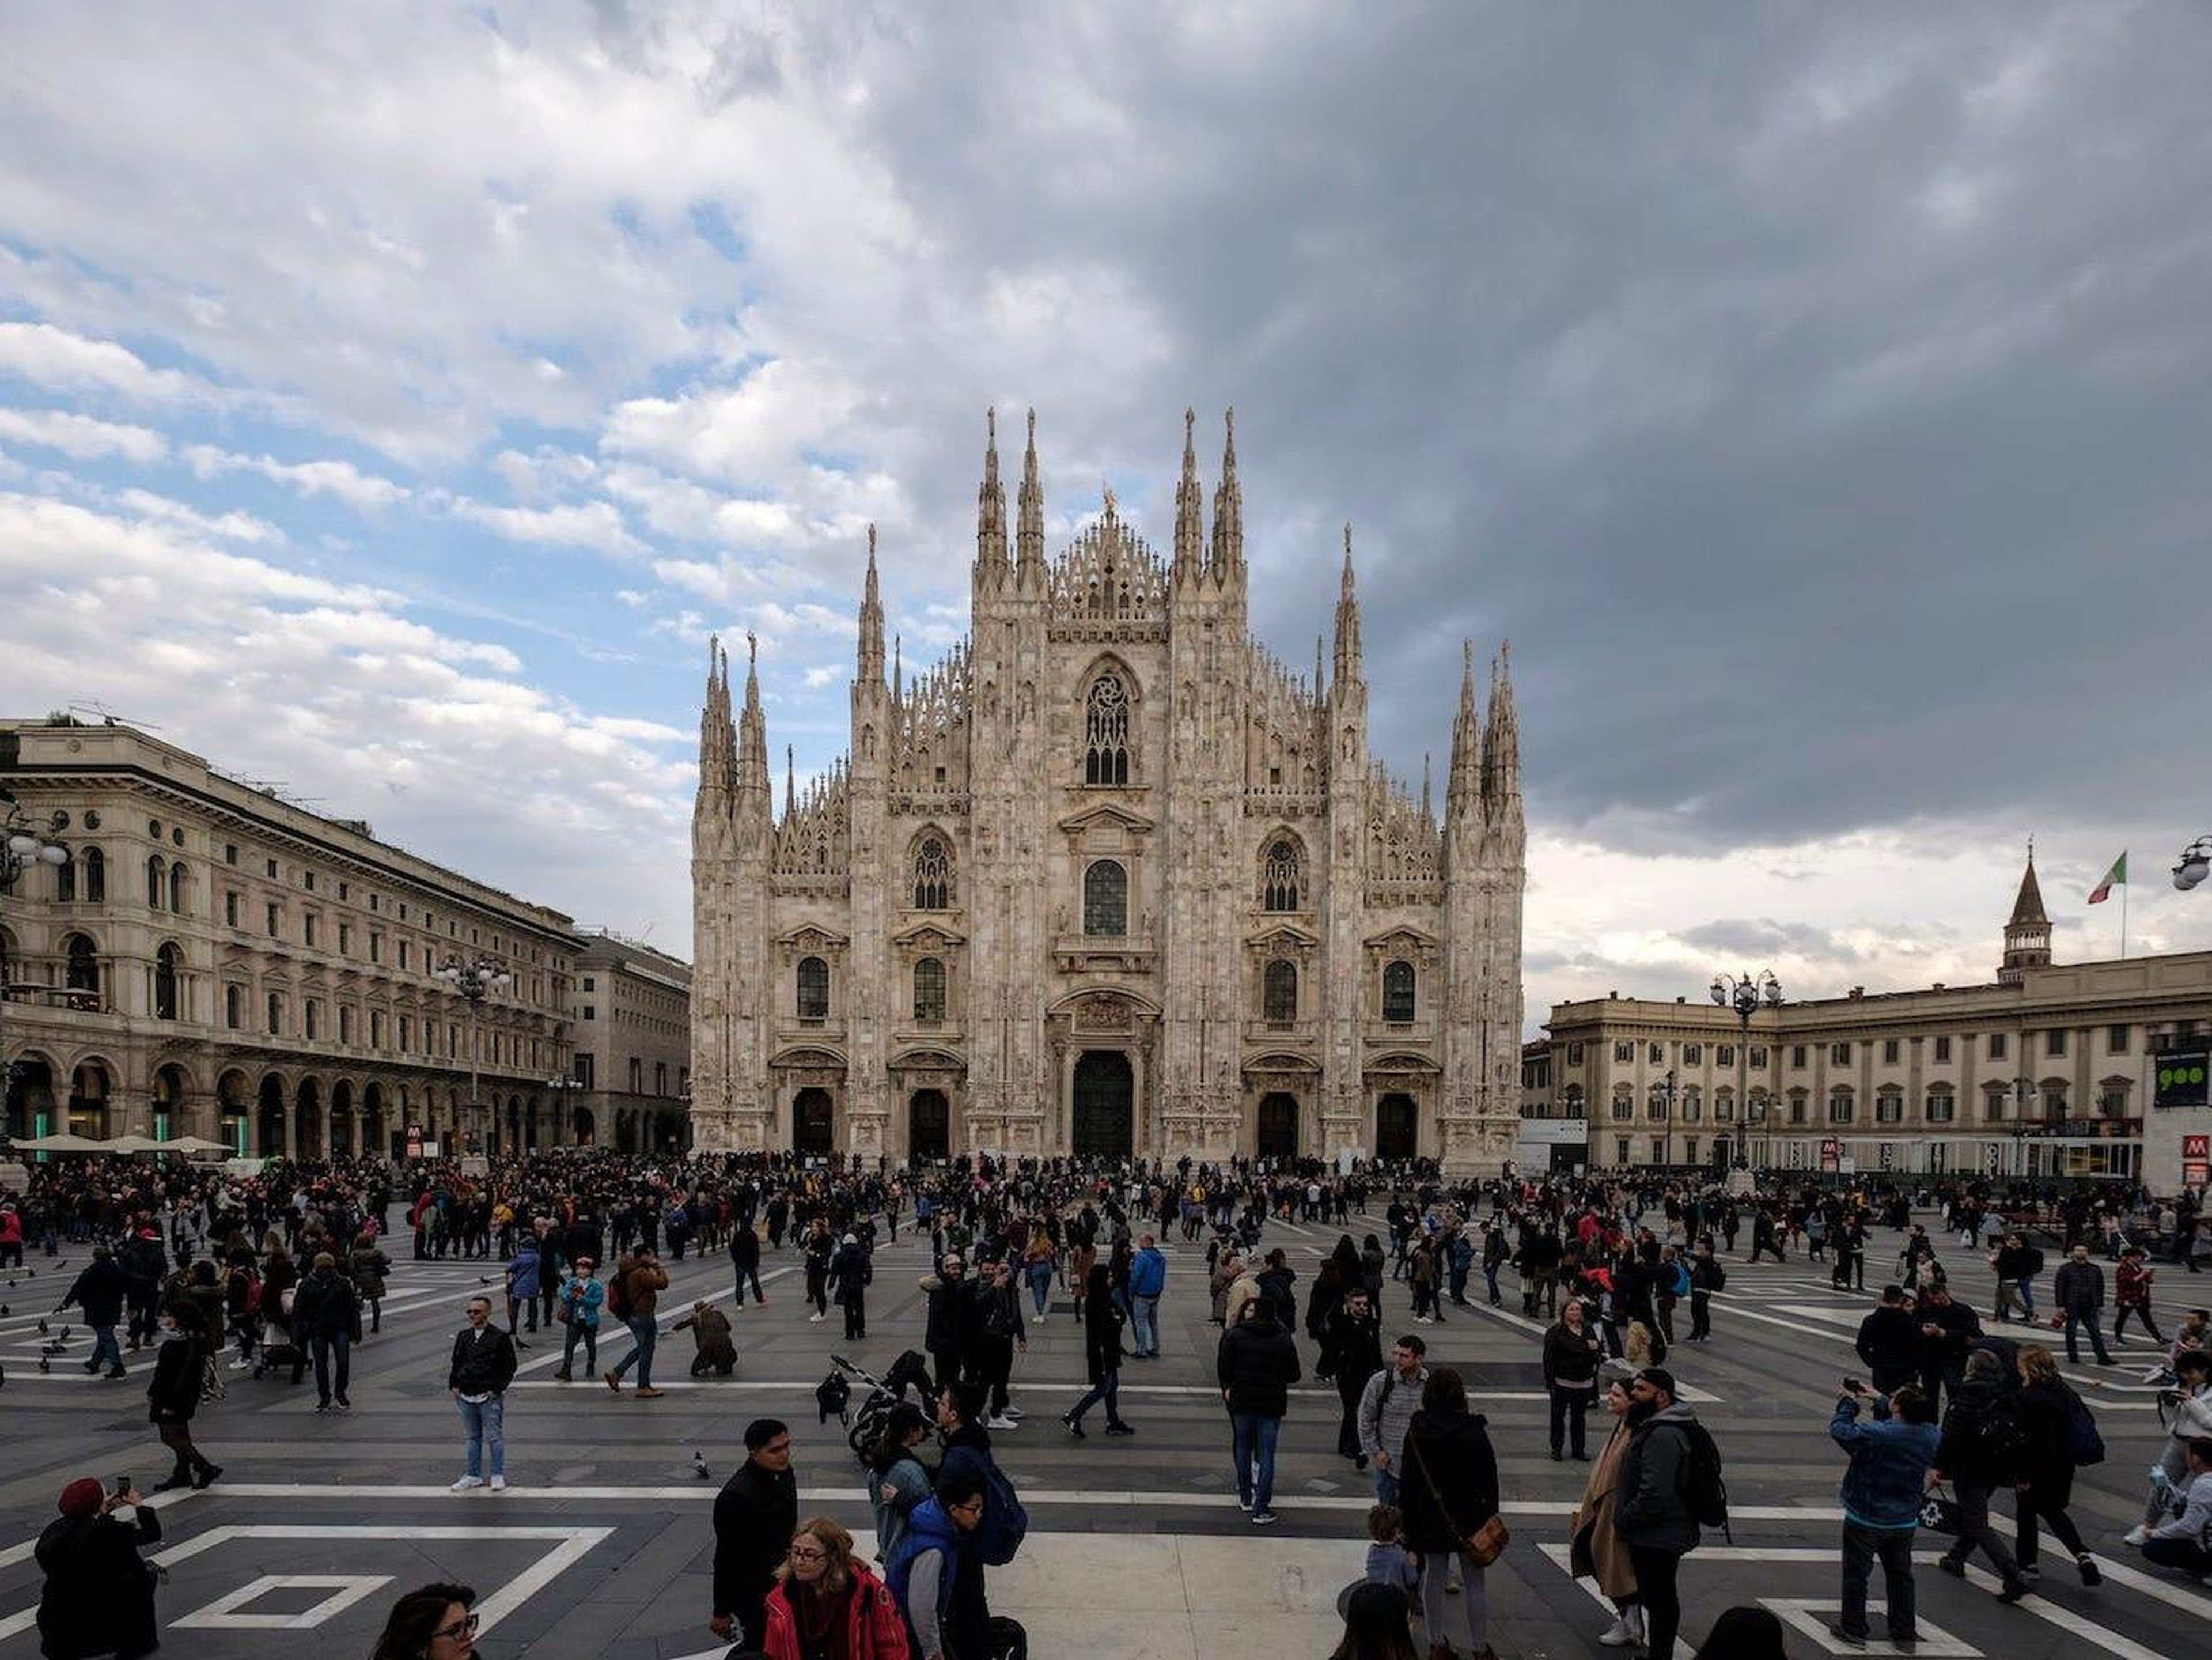 BEFORE: The Piazza del Duomo in Milan is one of the city's top attractions.